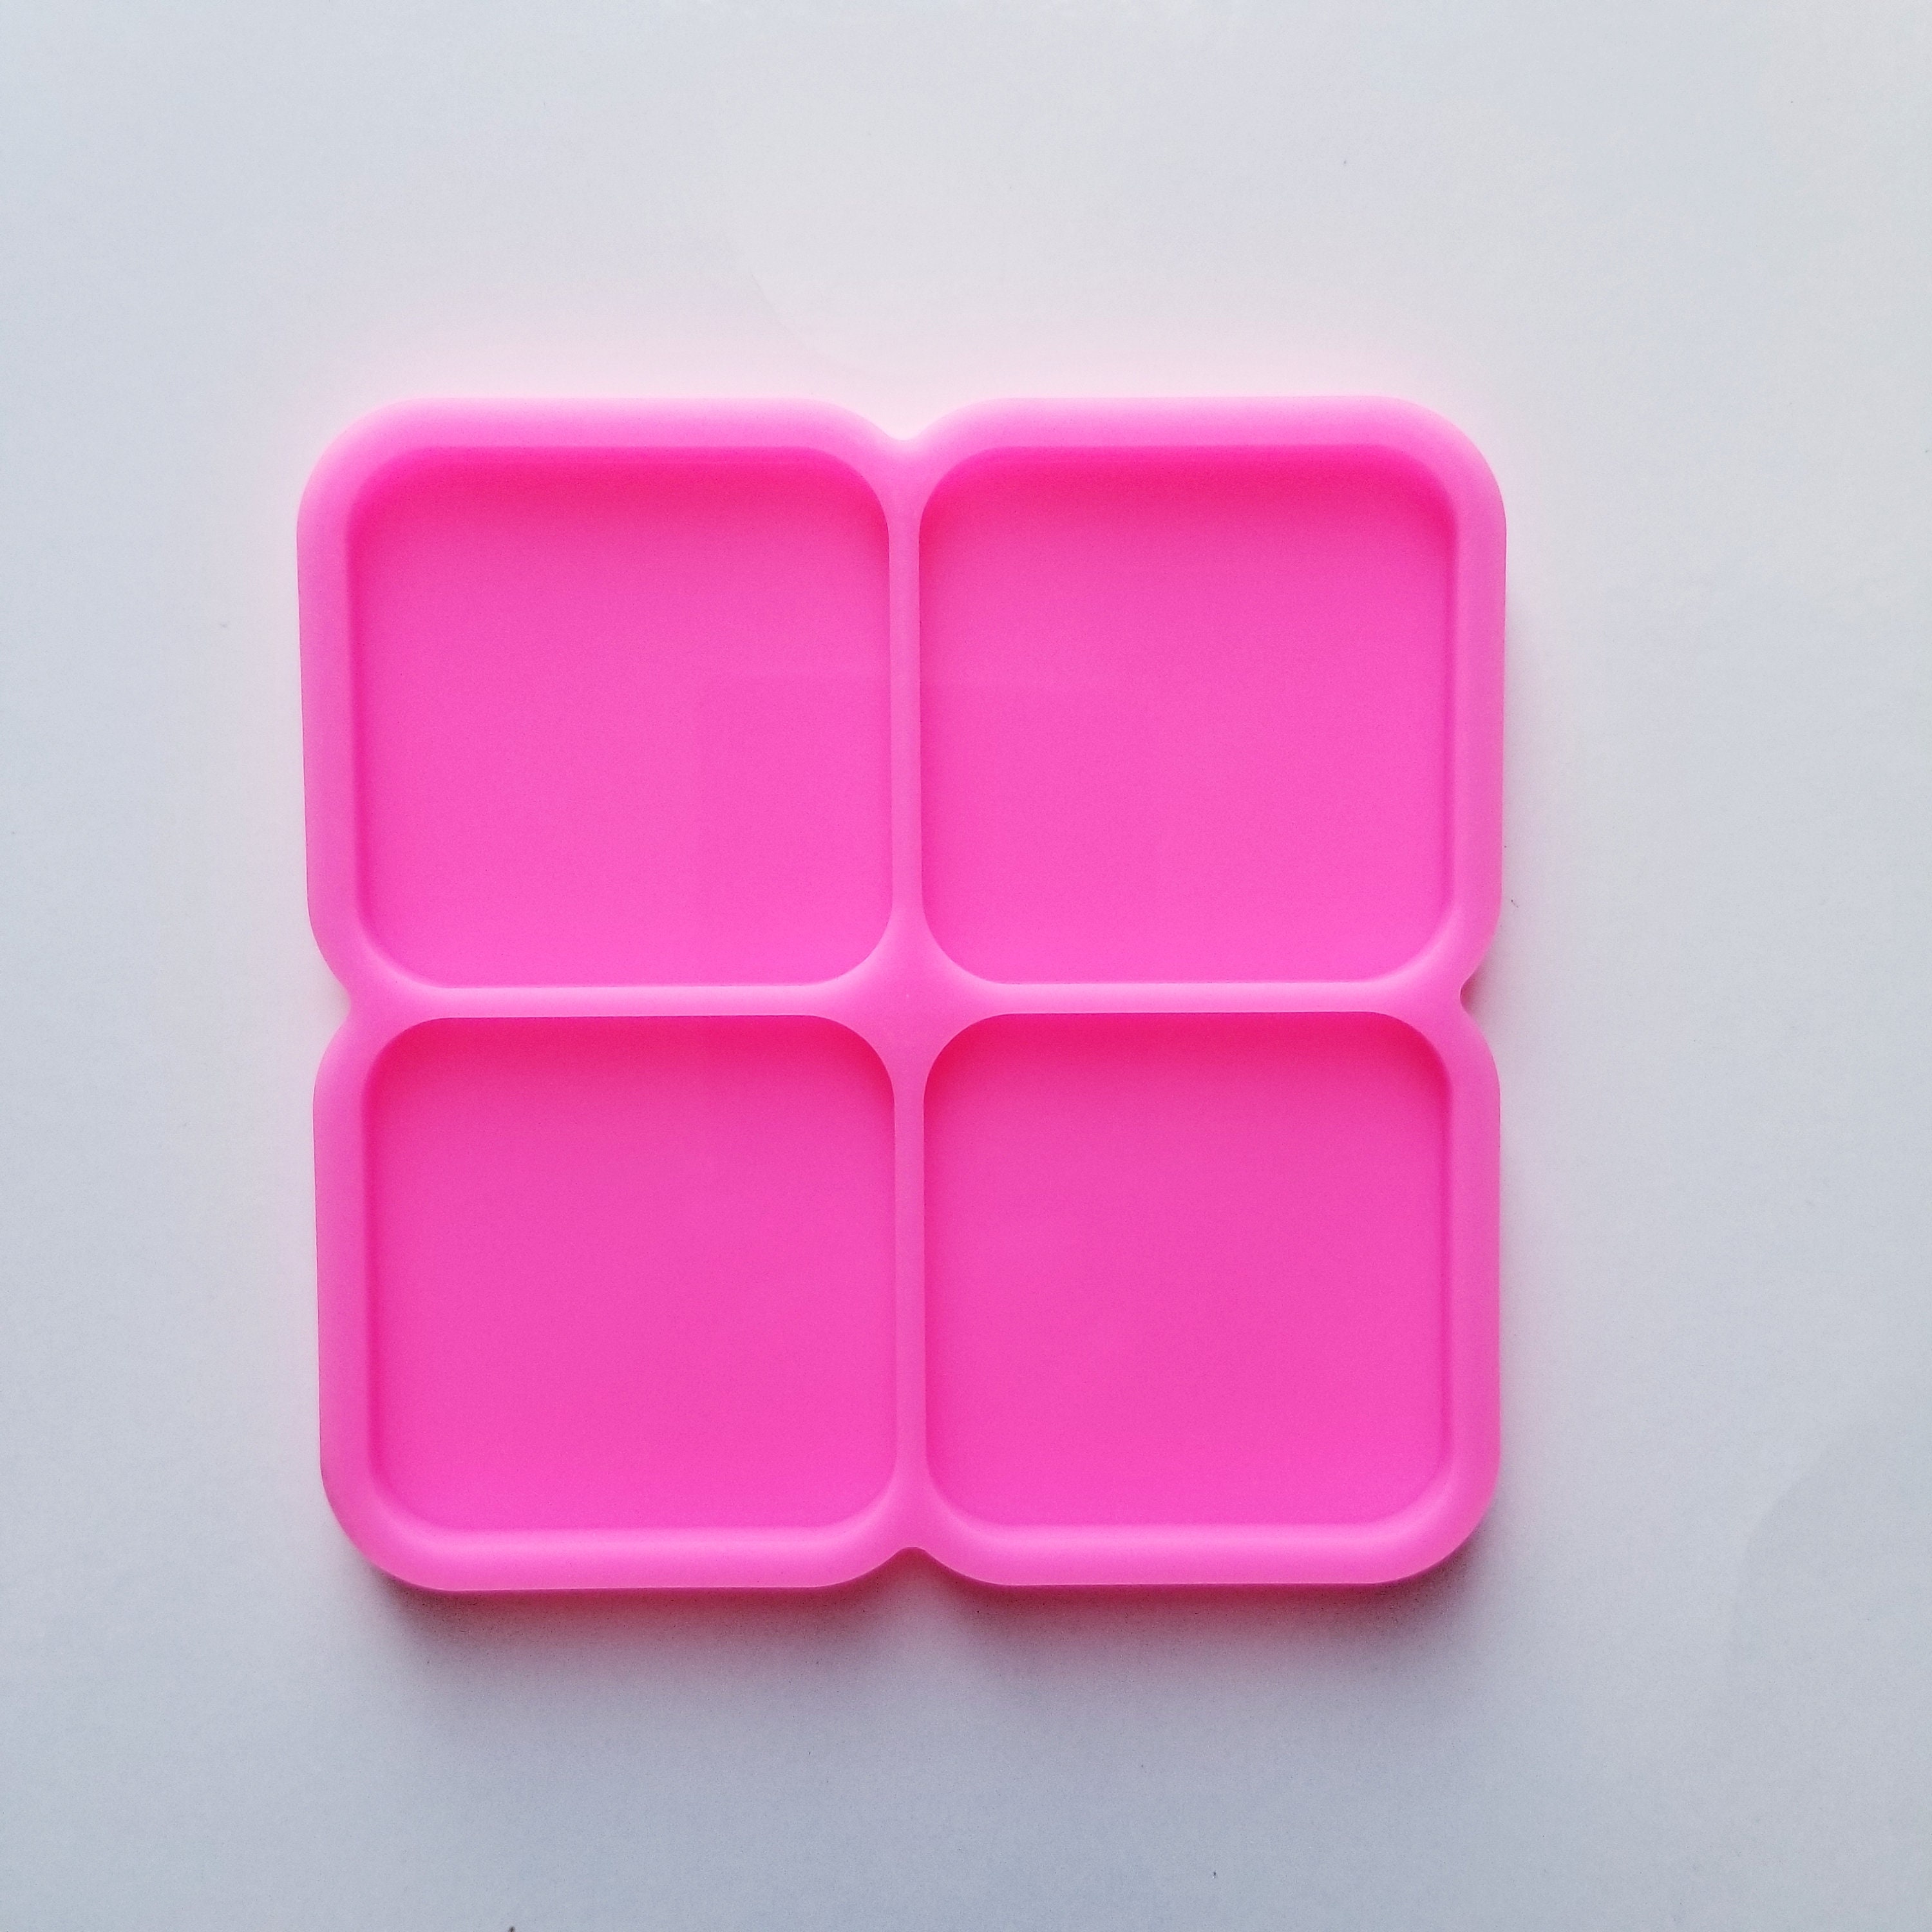  Pen Kit Mall - 4x4x4 Cube Silicone Molds Square Cube Silicone  Mold Resin Epoxy Casting Molds : Arts, Crafts & Sewing